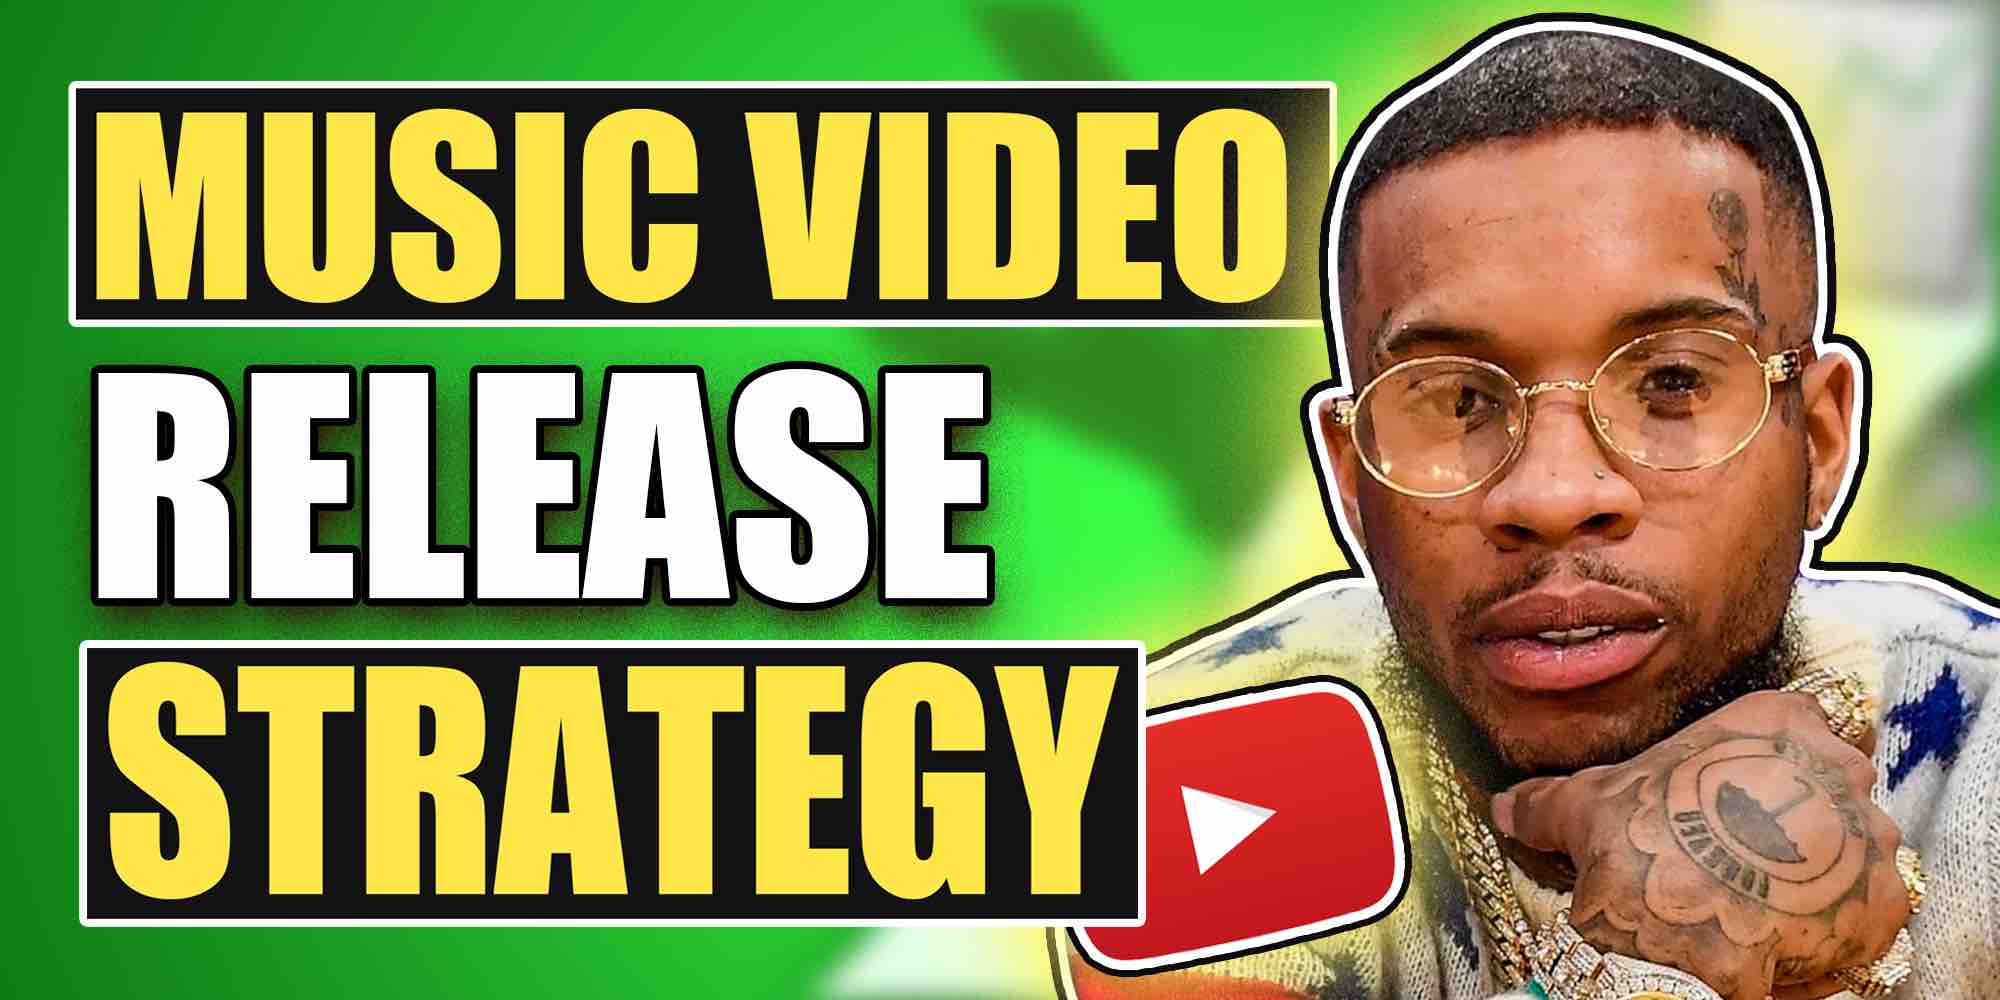 Music Video Release Strategy